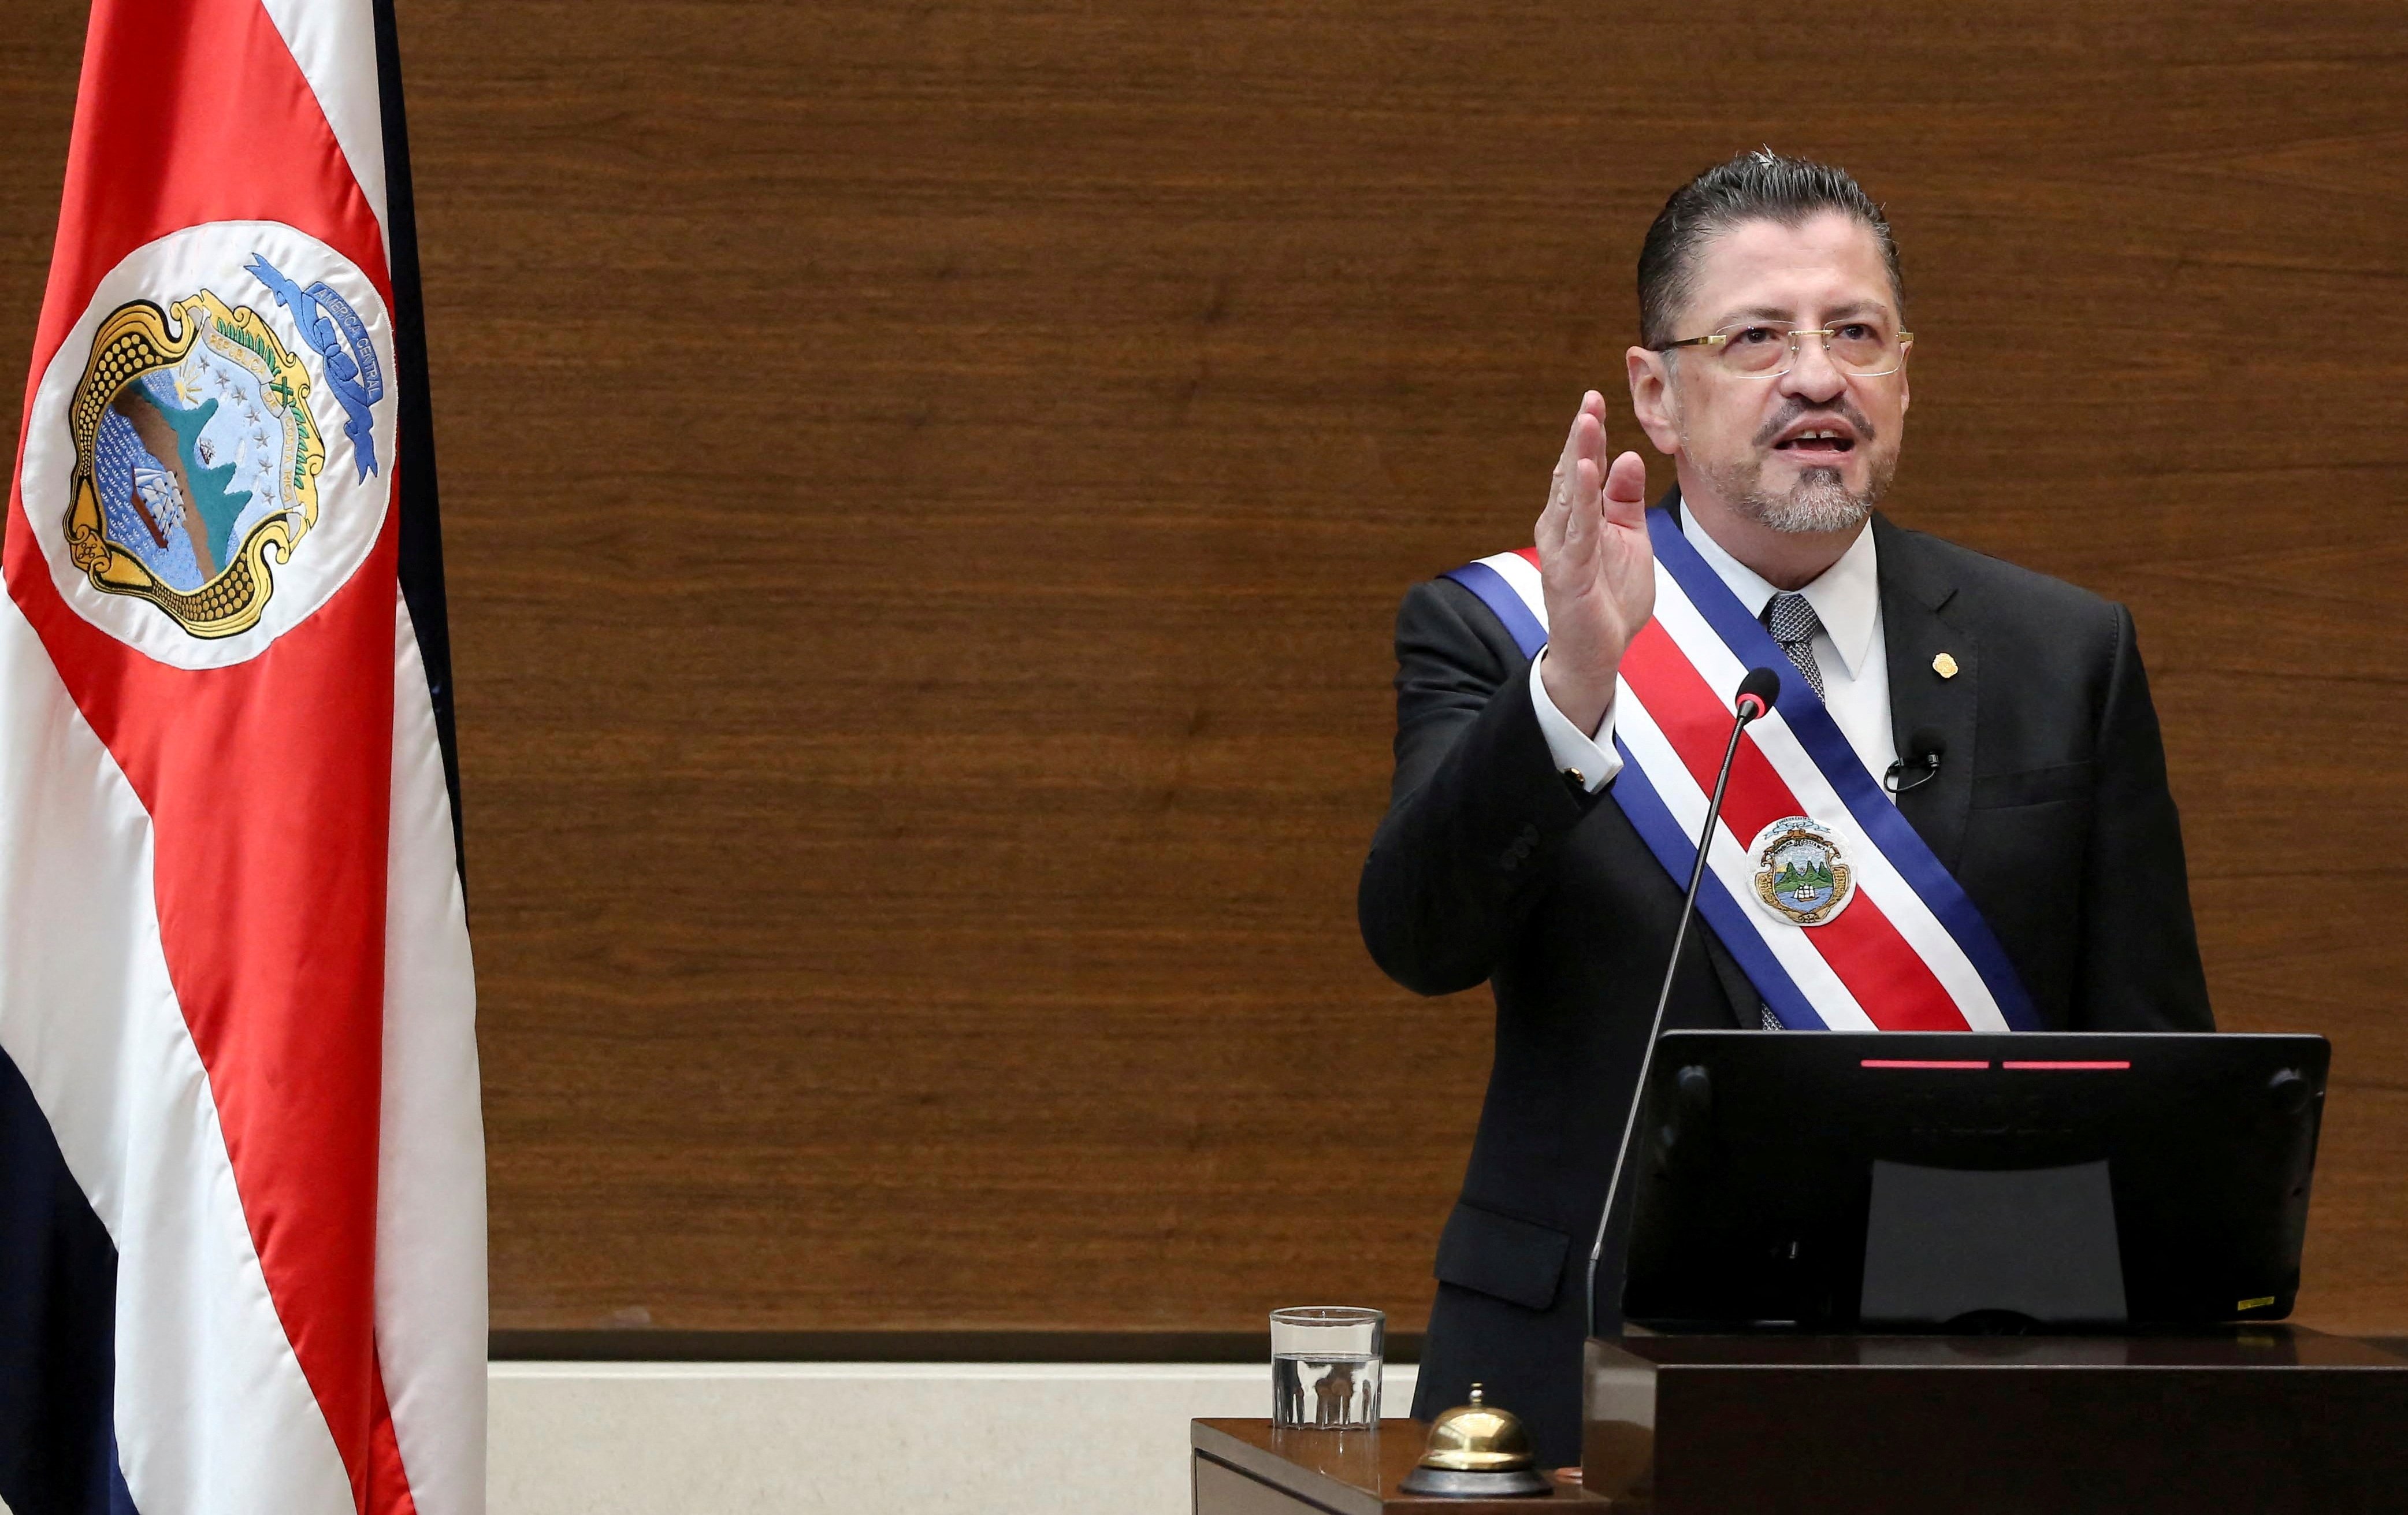 Costa Rica&#039;s President Rodrigo Chaves gestures as he delivers a speech after being sworn in during a ceremony at the hall of the Legislative Assembly, San Jose, Costa Rica, May 8, 2022. (REUTERS PHOTO)